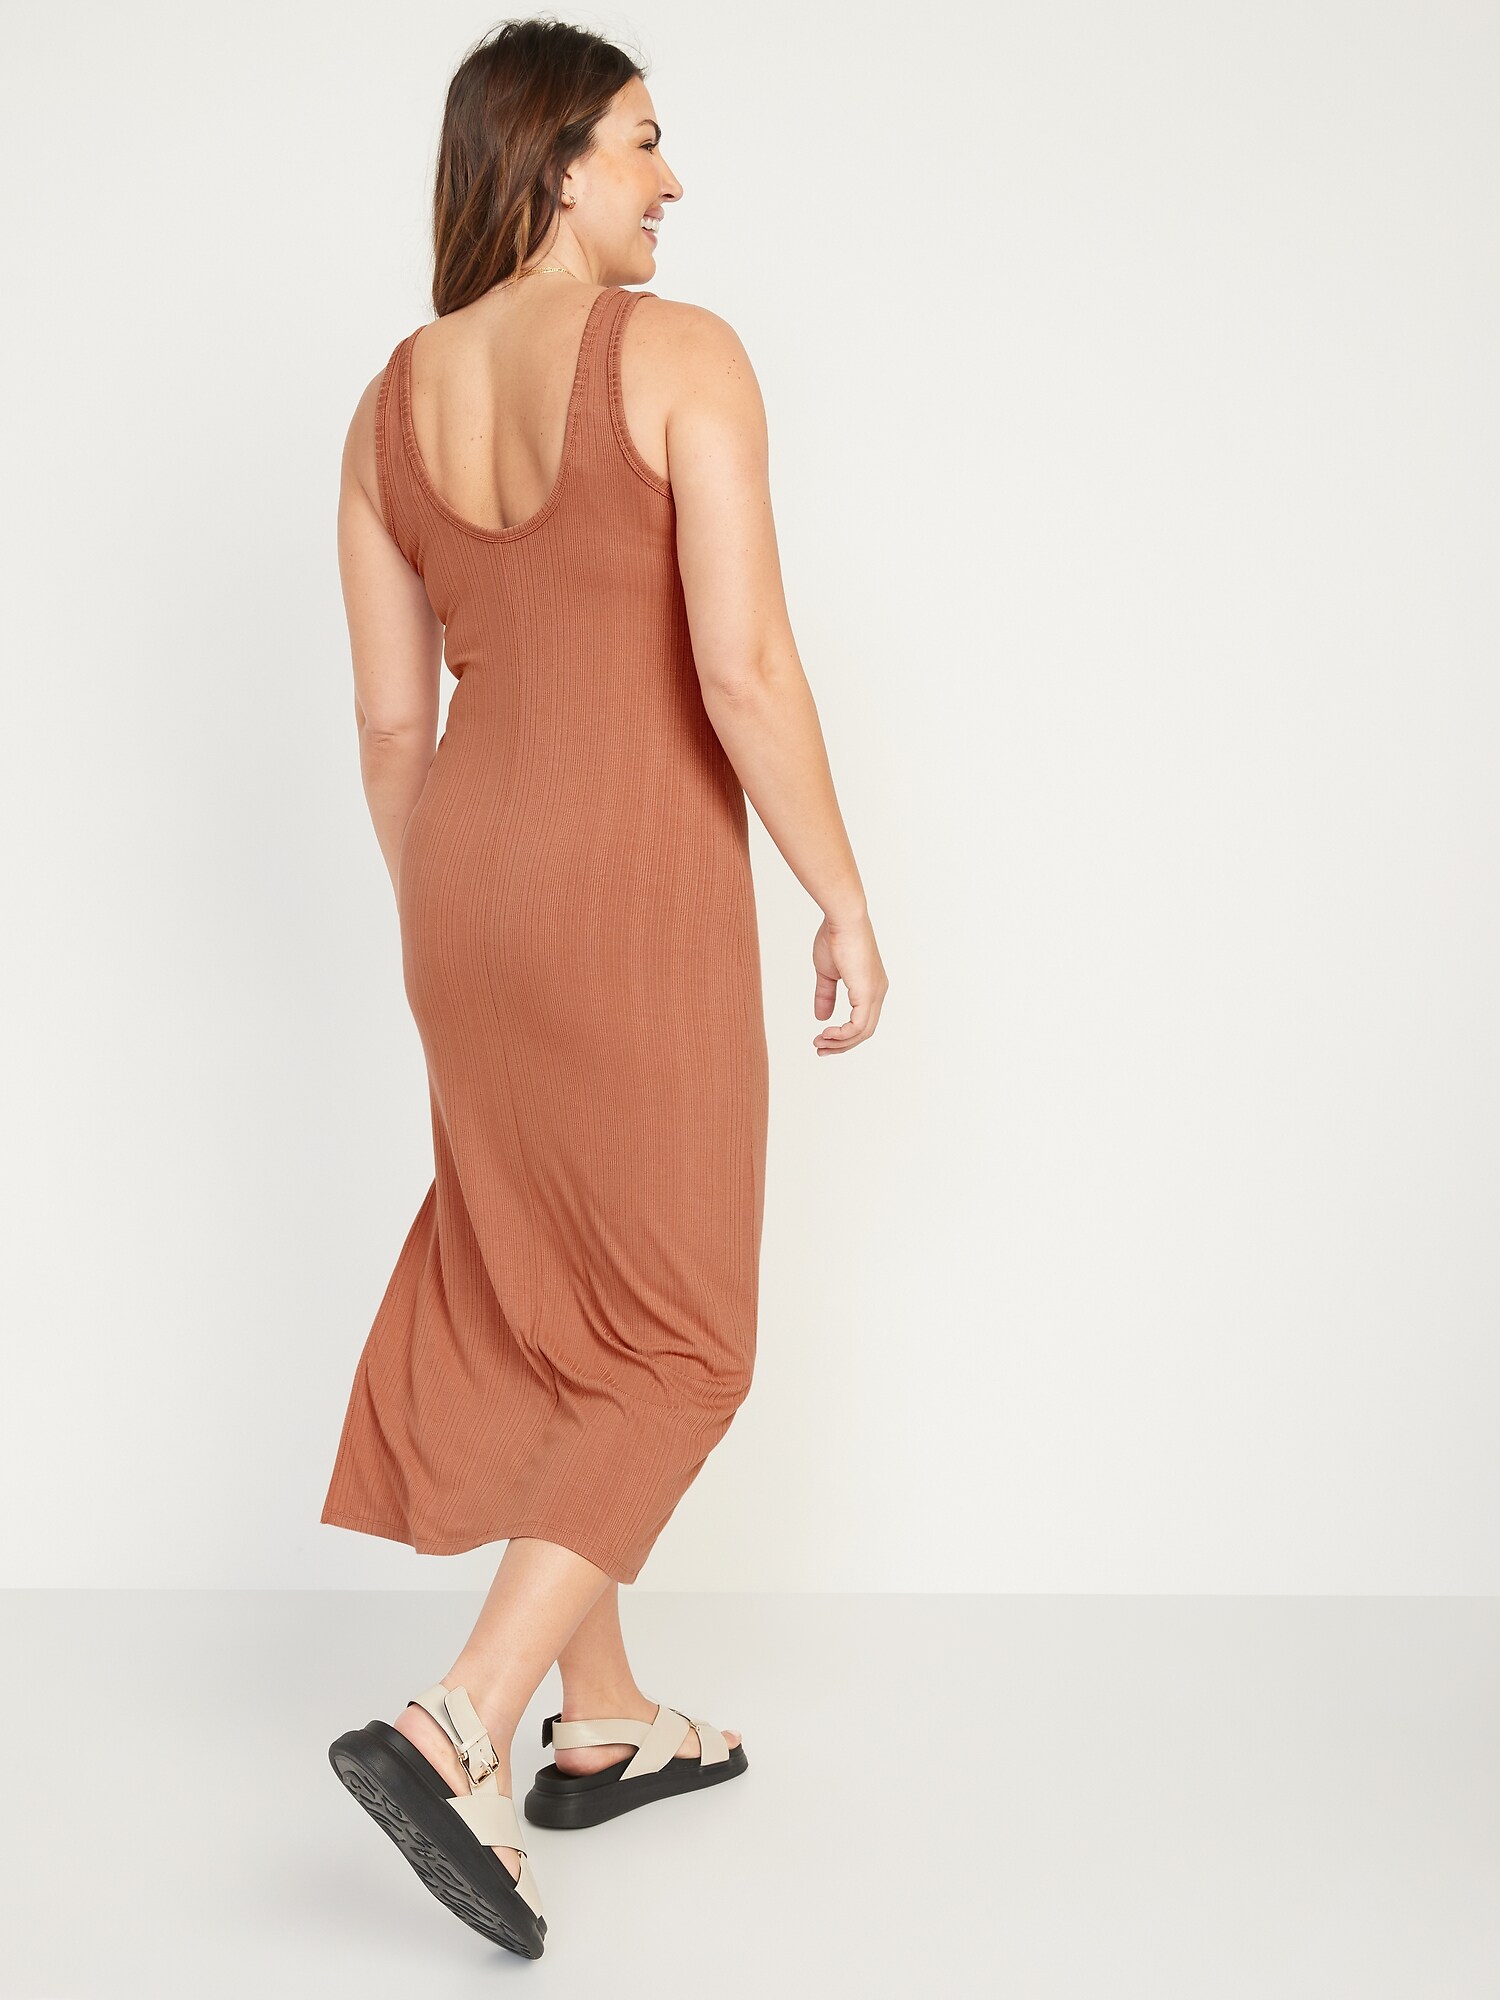 Fitted Sleeveless Rib Knit Midi Dress For Women Old Navy 